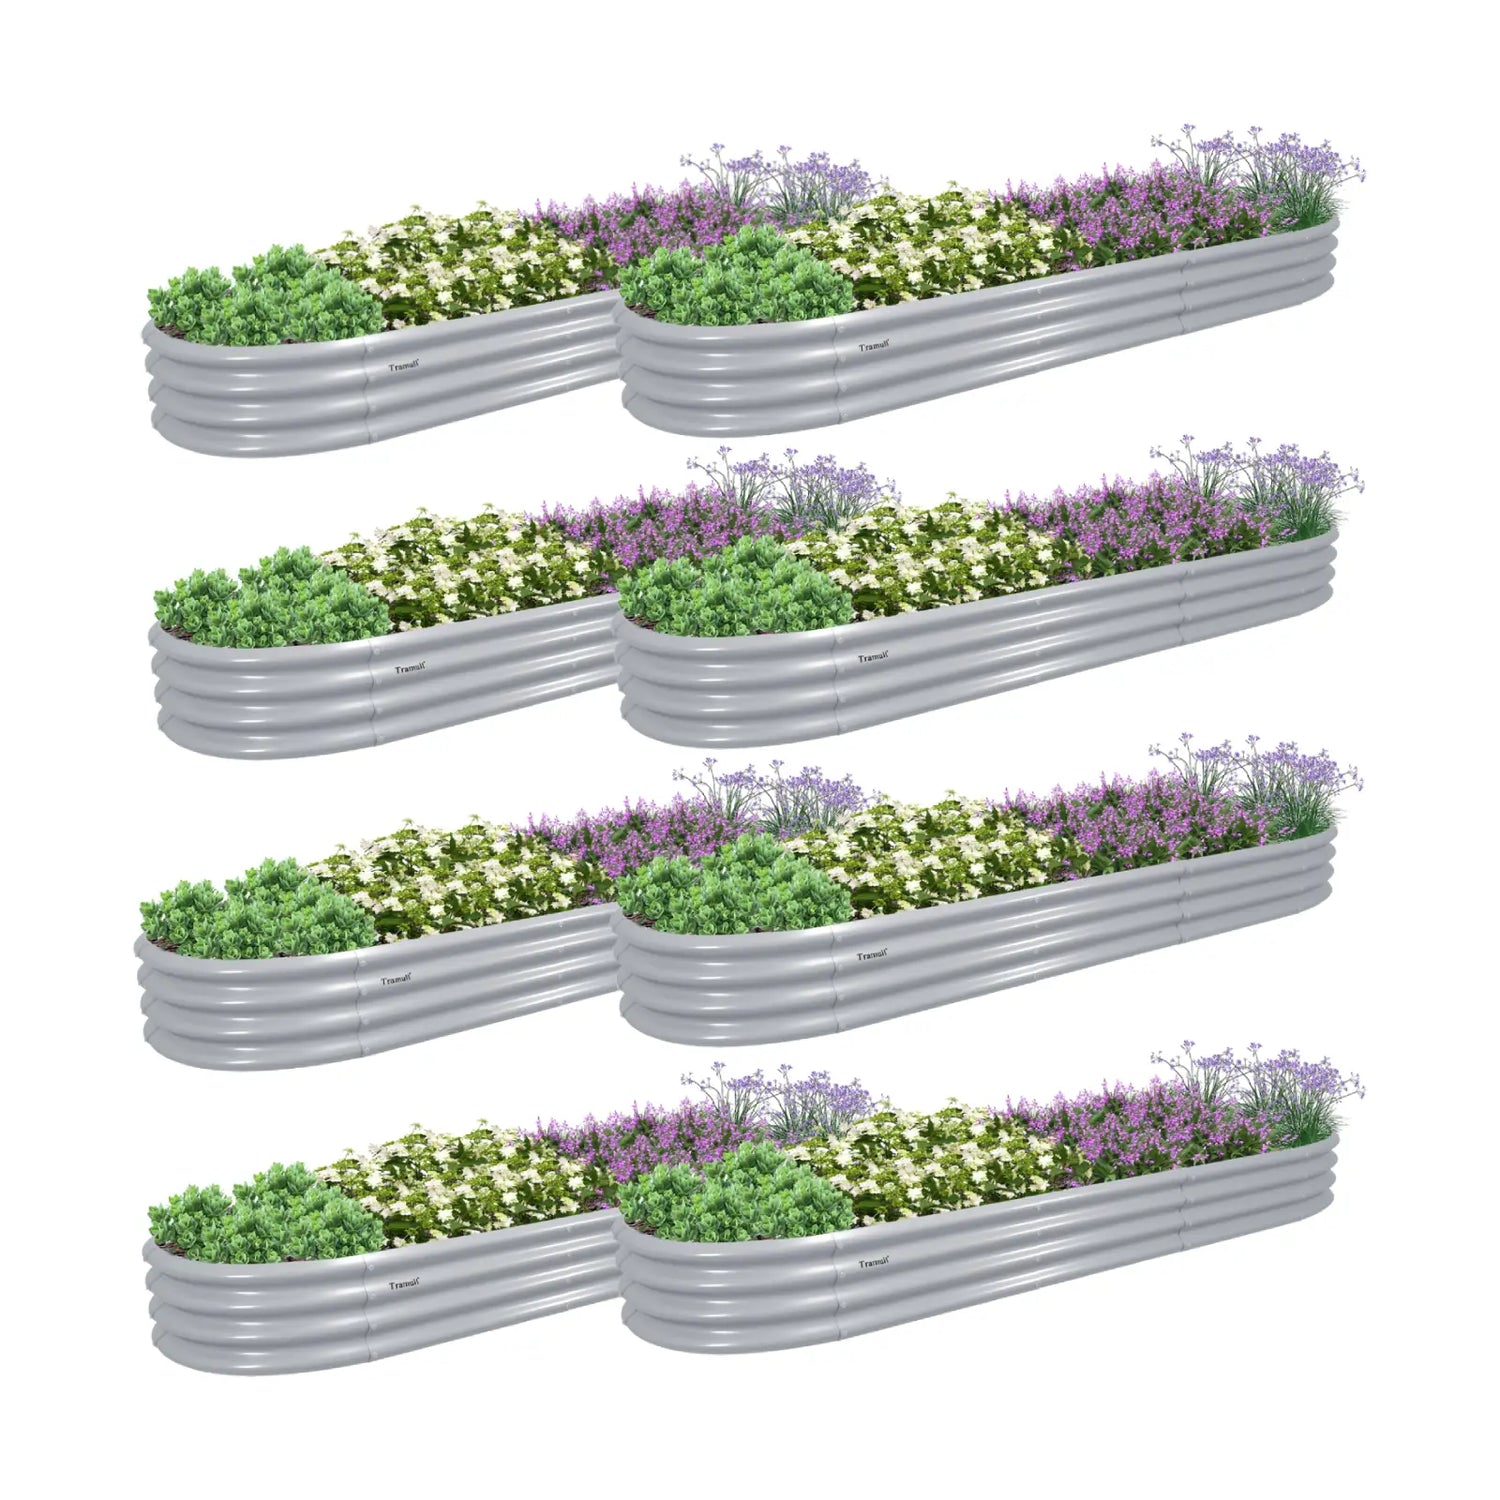 Bundle of 8 | 12" Tall 12x2ft Oval Metal Raised Garden Beds